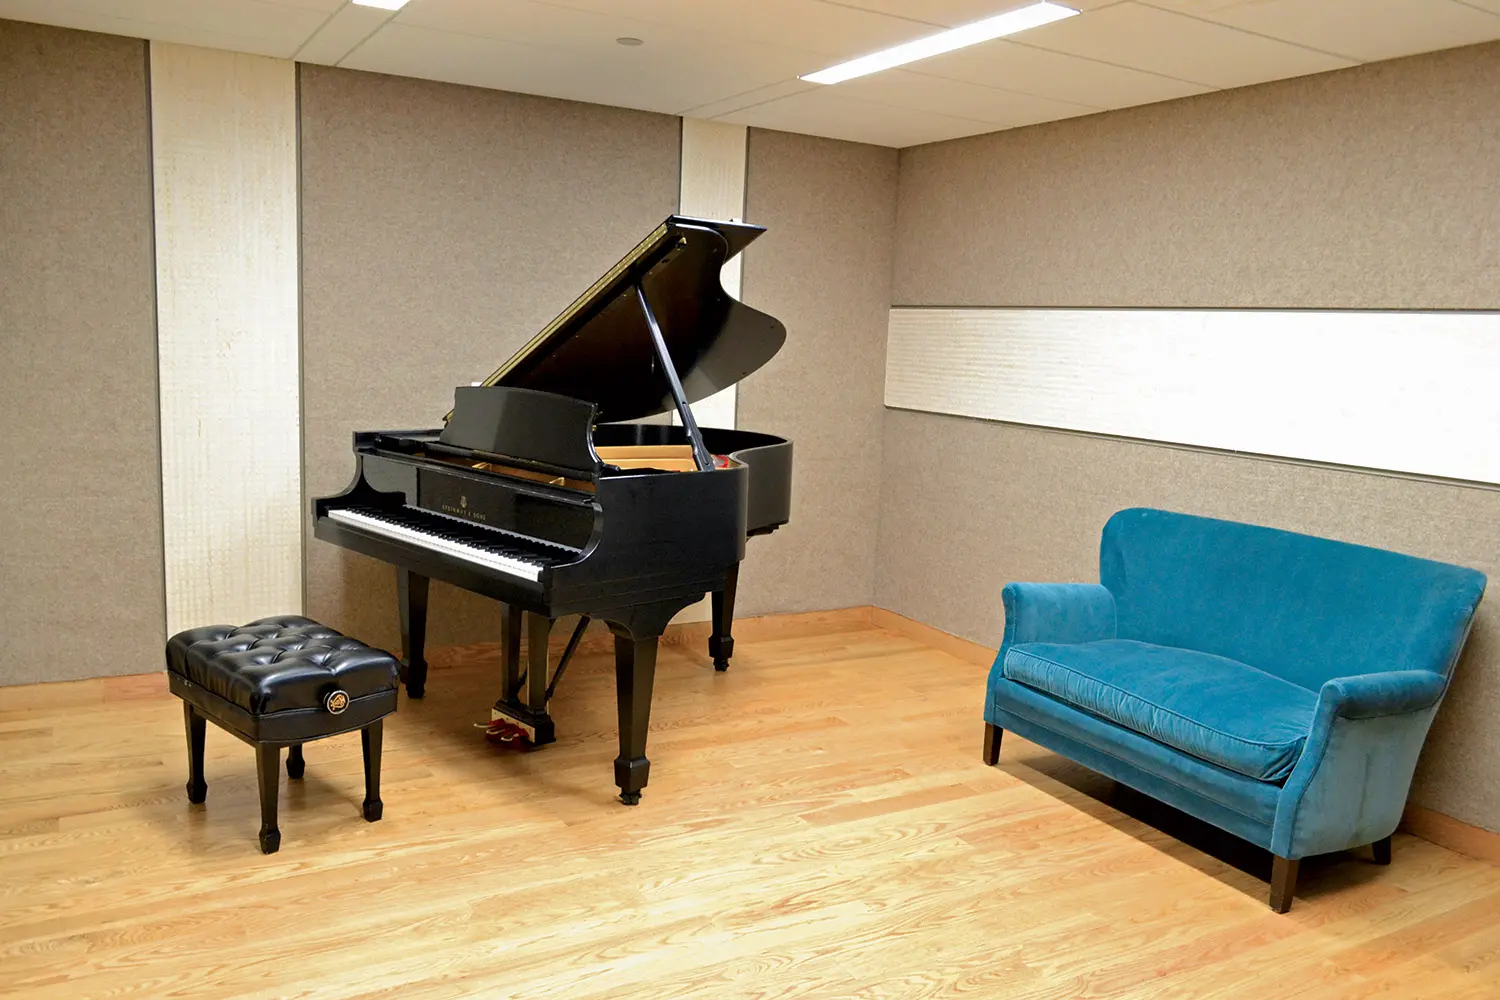 Lockwood Green Room with full stick piano